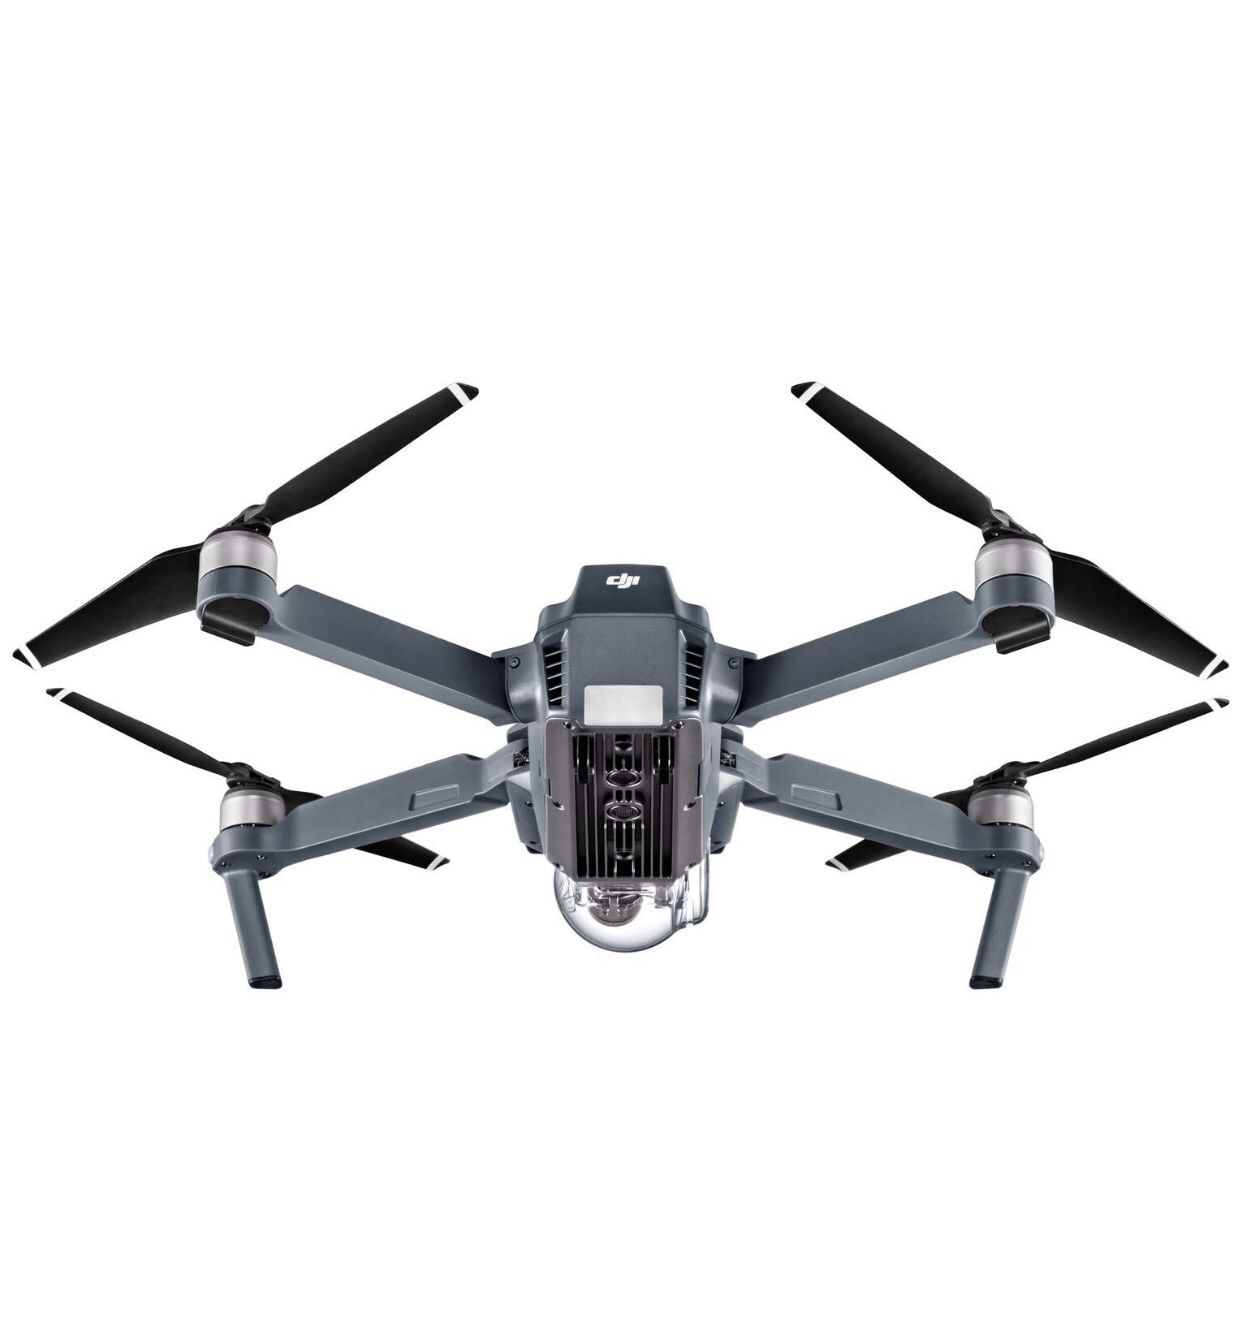 New DJI Magic Pro Fly More Combo With Extra Batteries, Case and More Extras